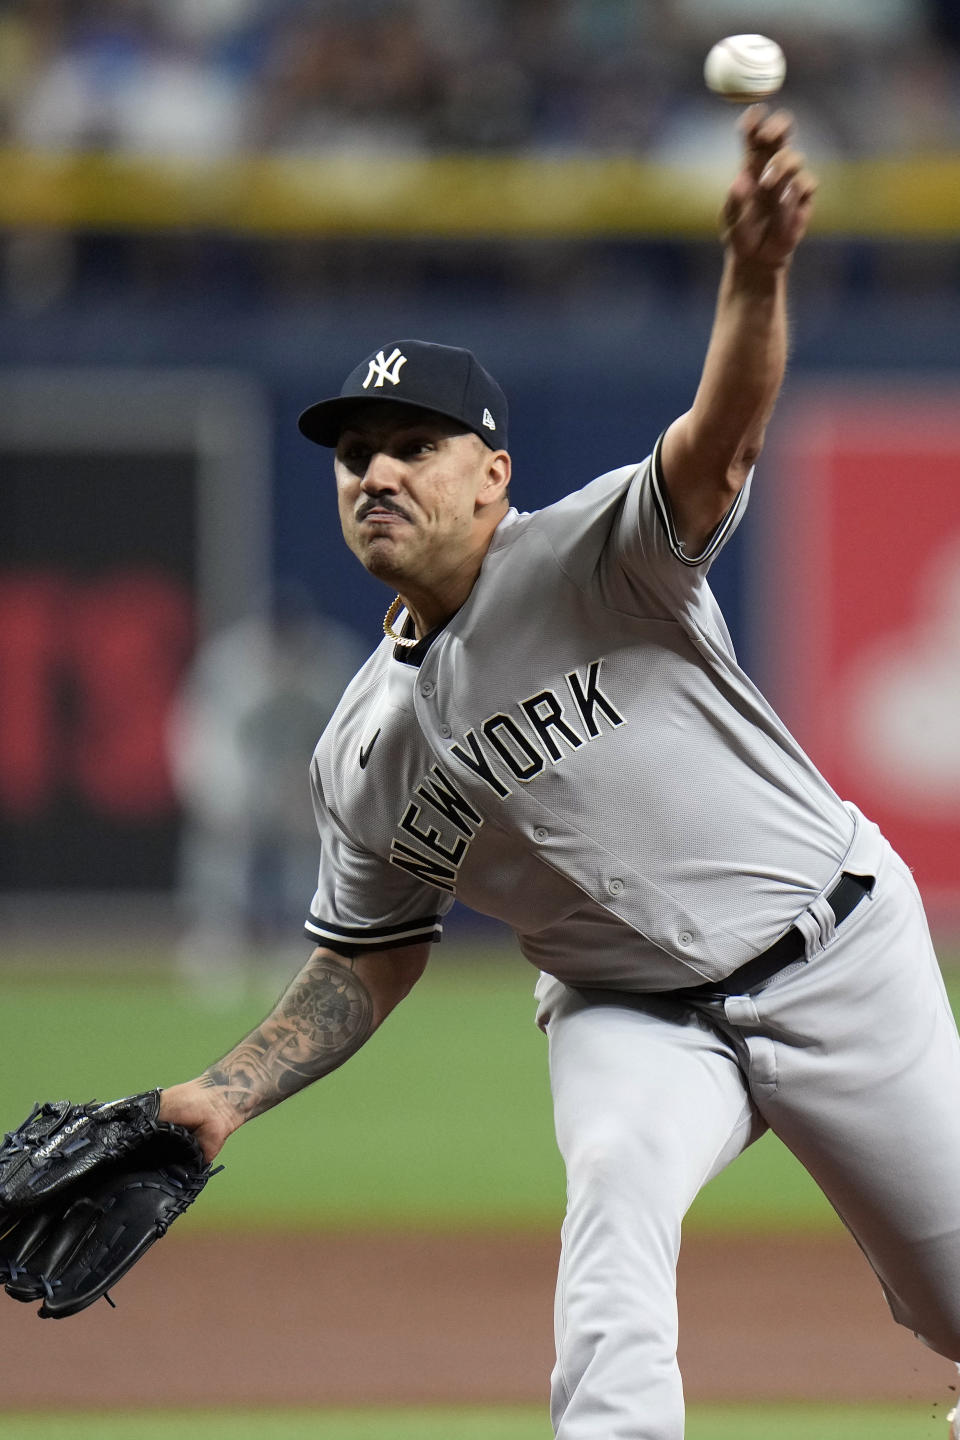 New York Yankees' Nestor Cortes pitches to the Tampa Bay Rays during the first inning of a baseball game Thursday, May 26, 2022, in St. Petersburg, Fla. (AP Photo/Chris O'Meara)